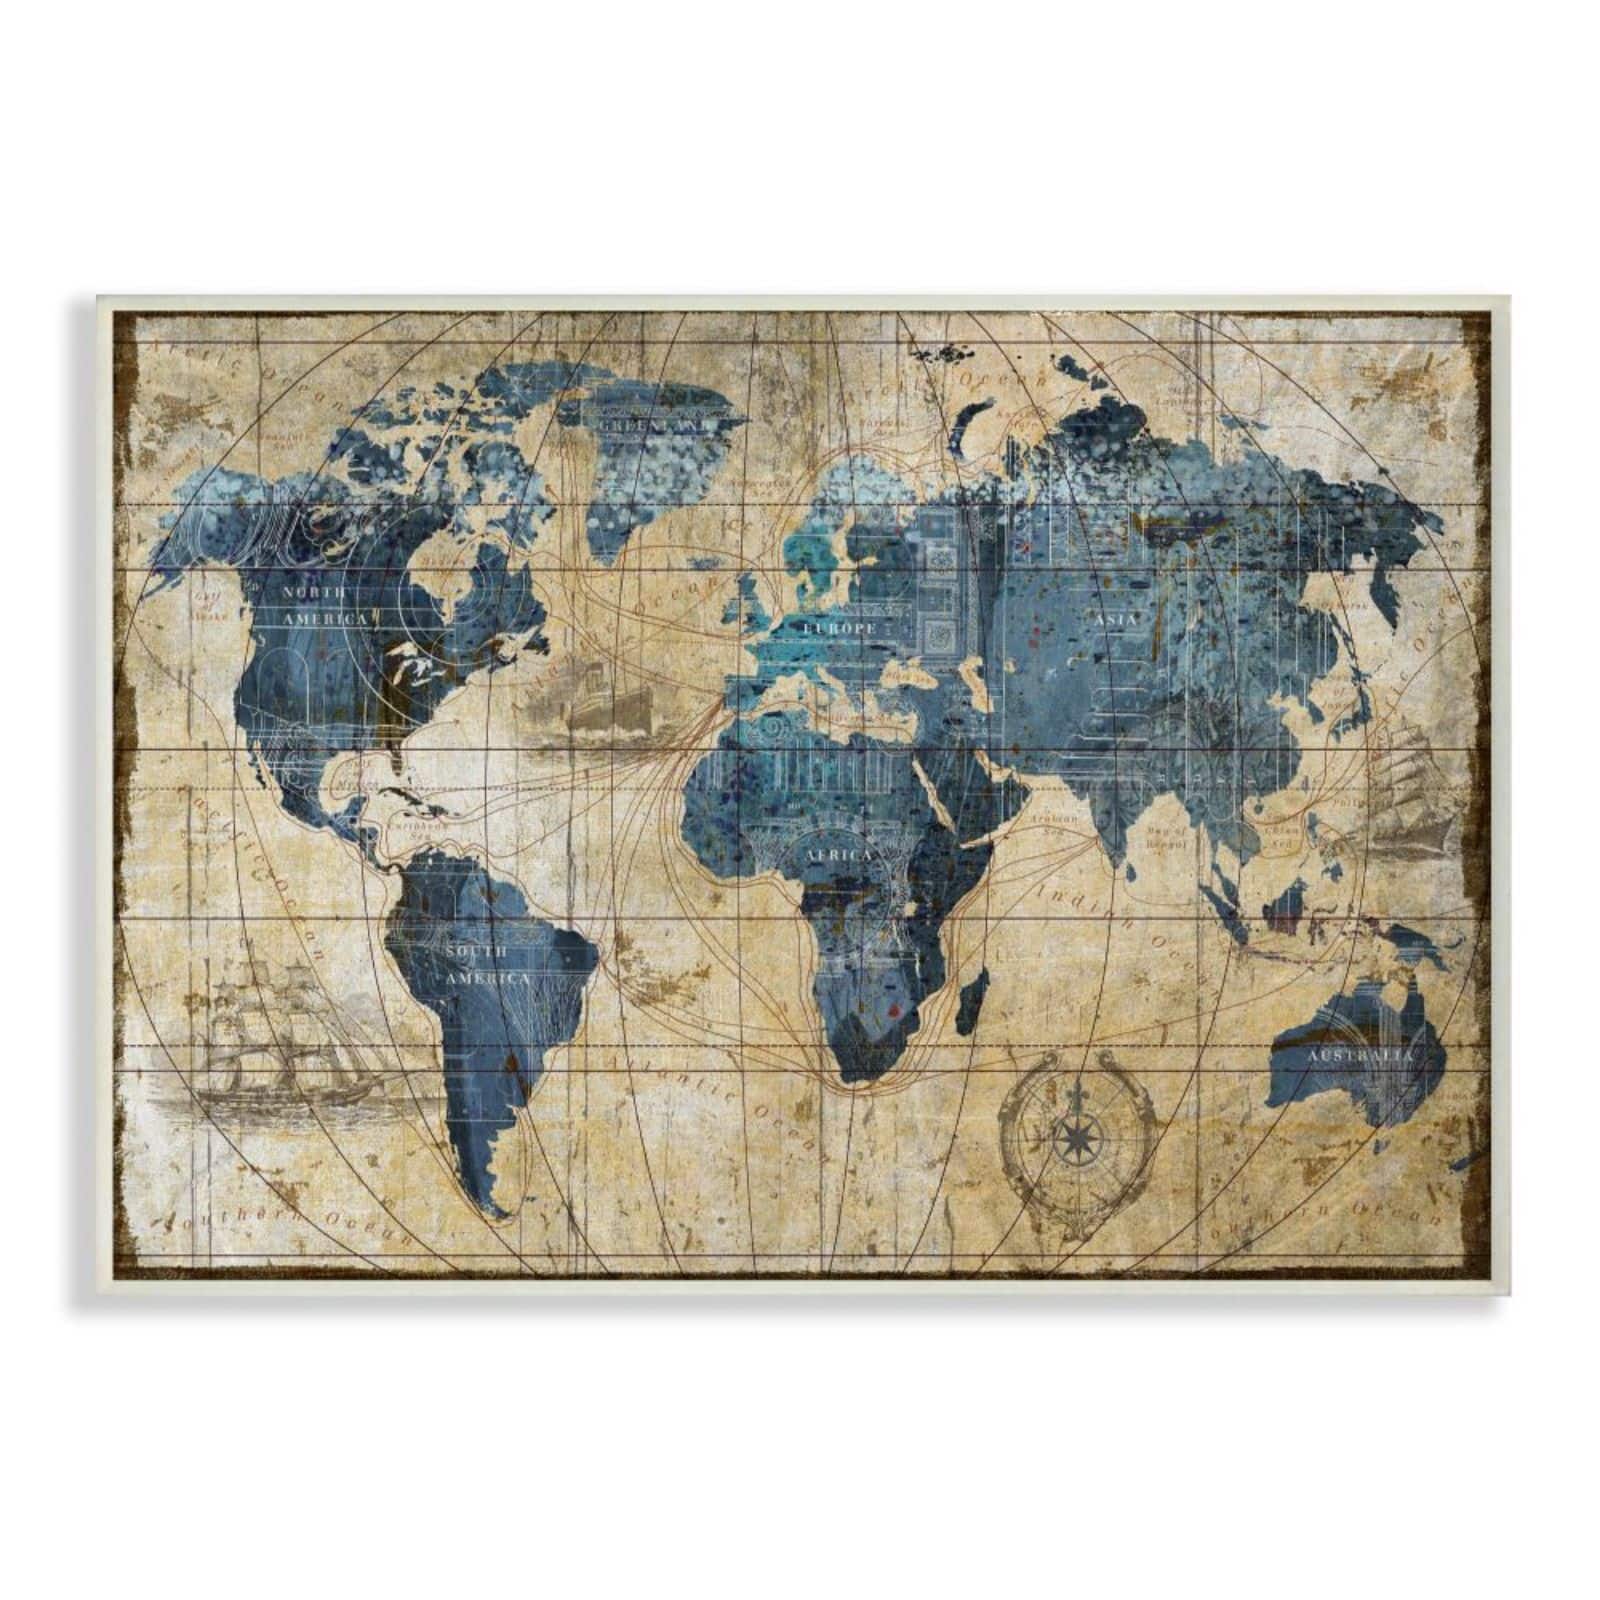 Stupell Industries Vintage World Map Design Wall Plaque